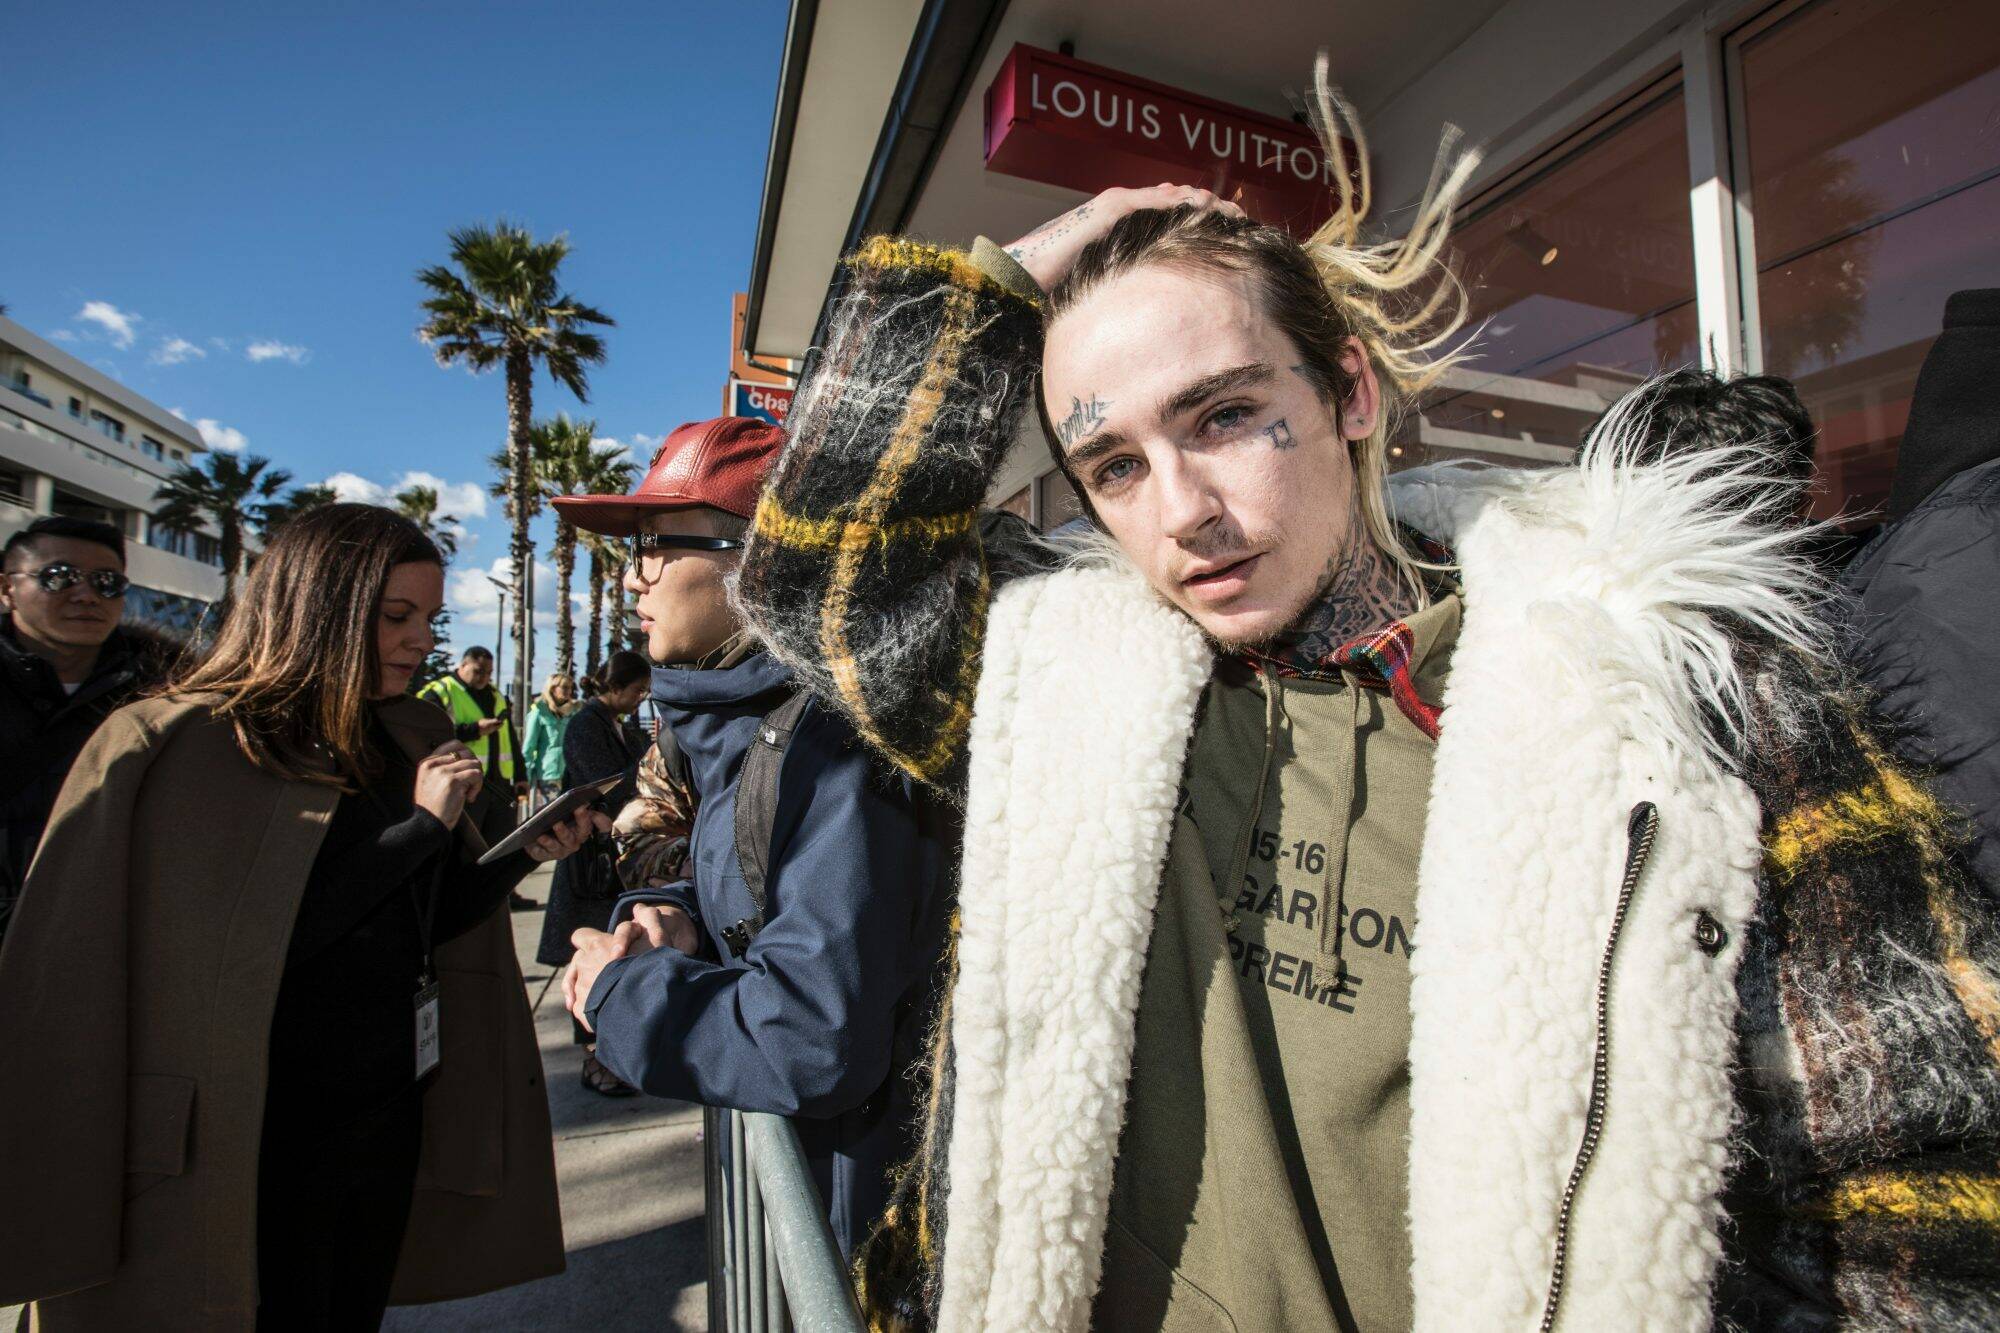 Die hard fans camp overnight for Louis Vuitton Supreme